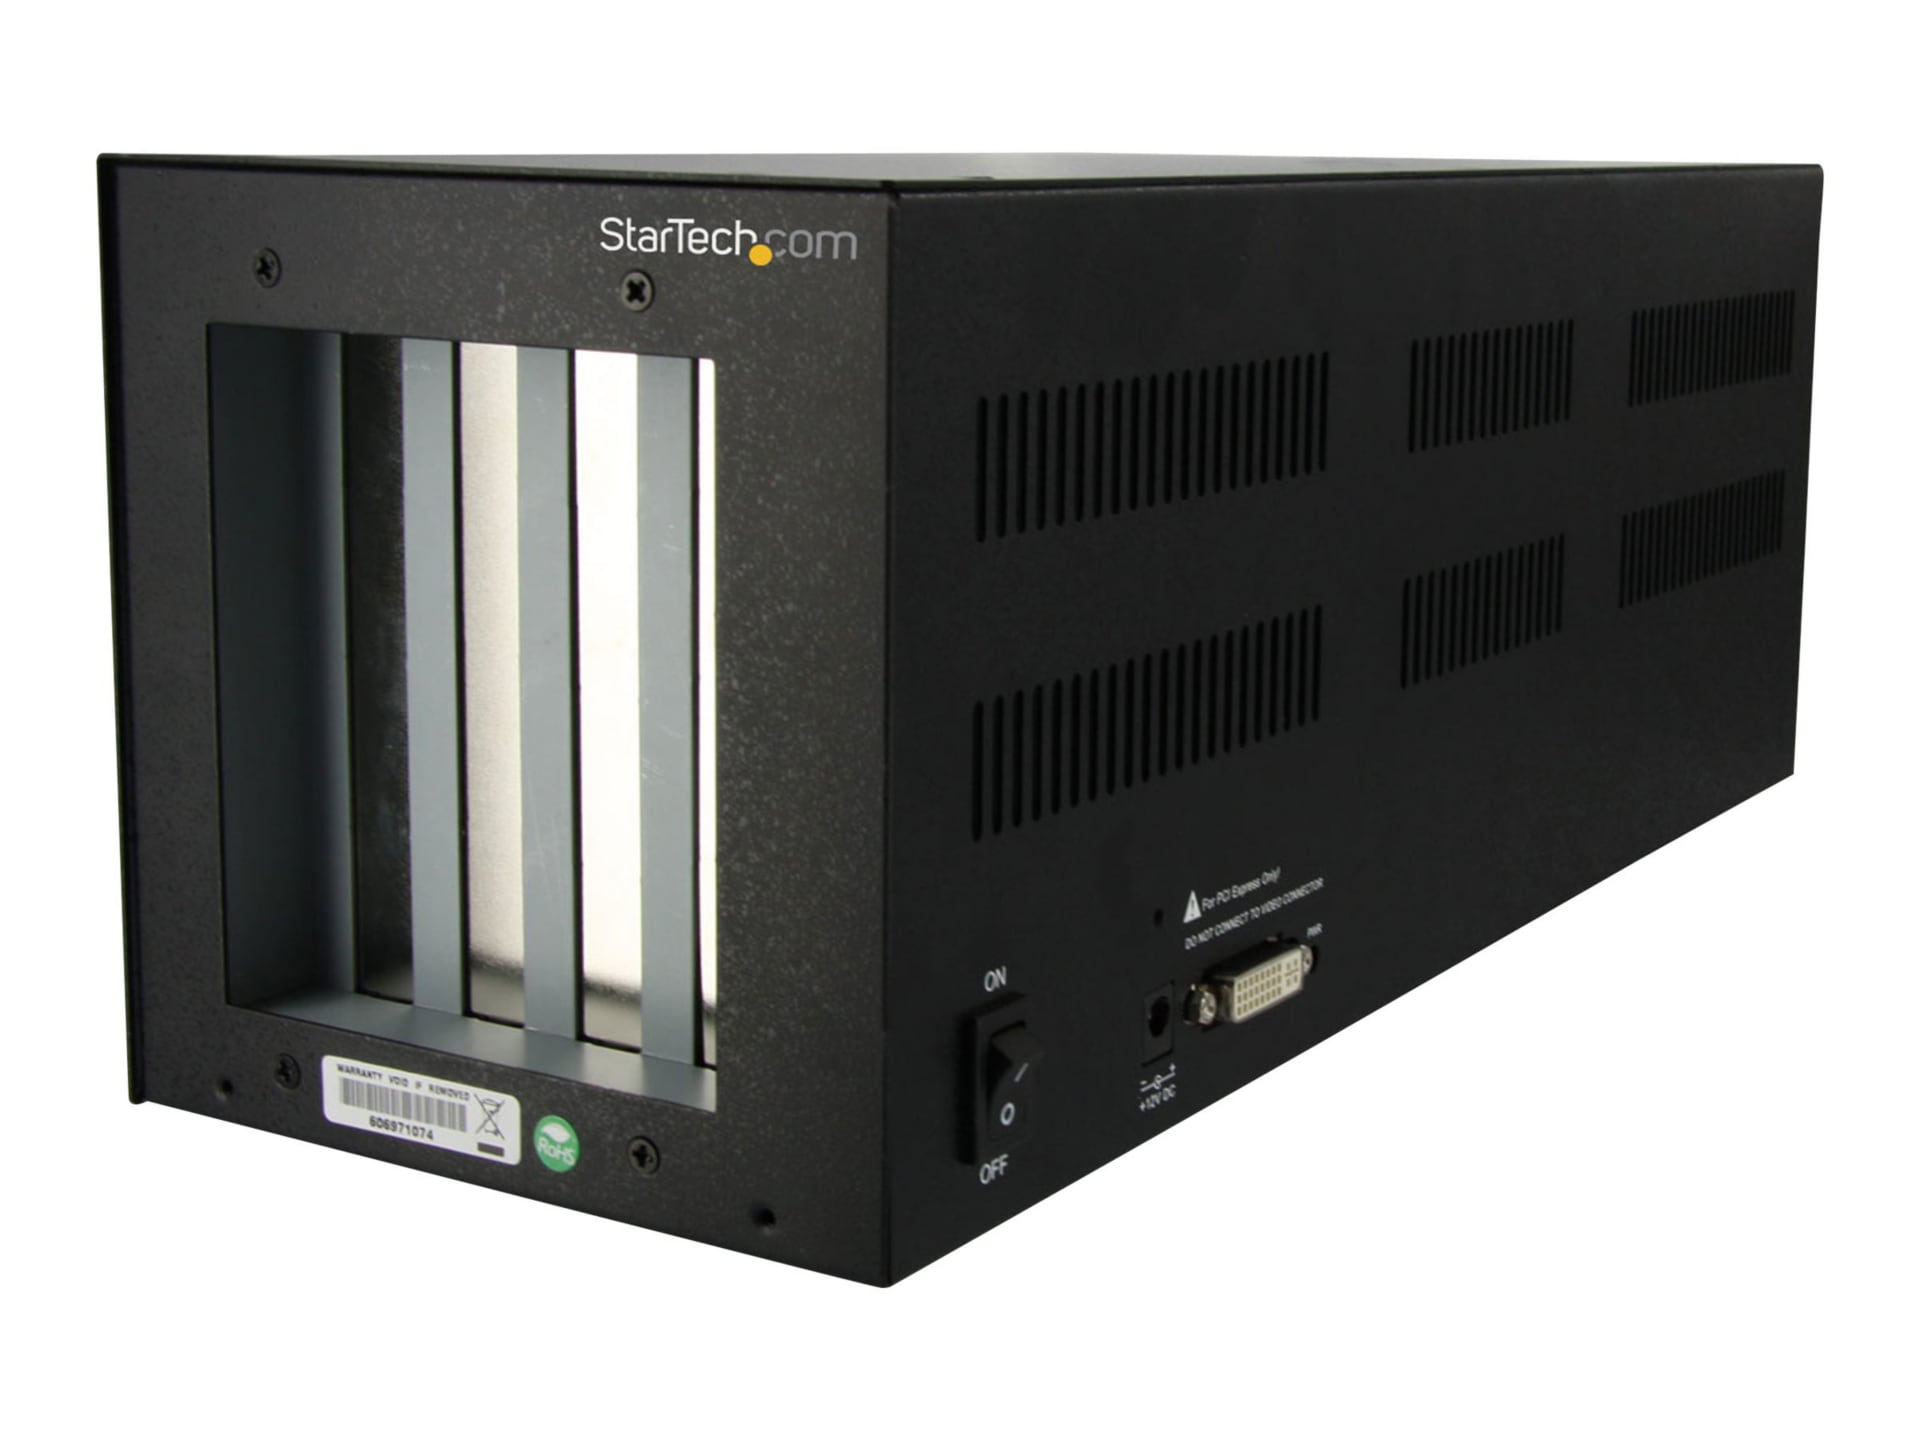 StarTech.com PCI Express to 2 PCI and 2 PCIe Expansion Enclosure System